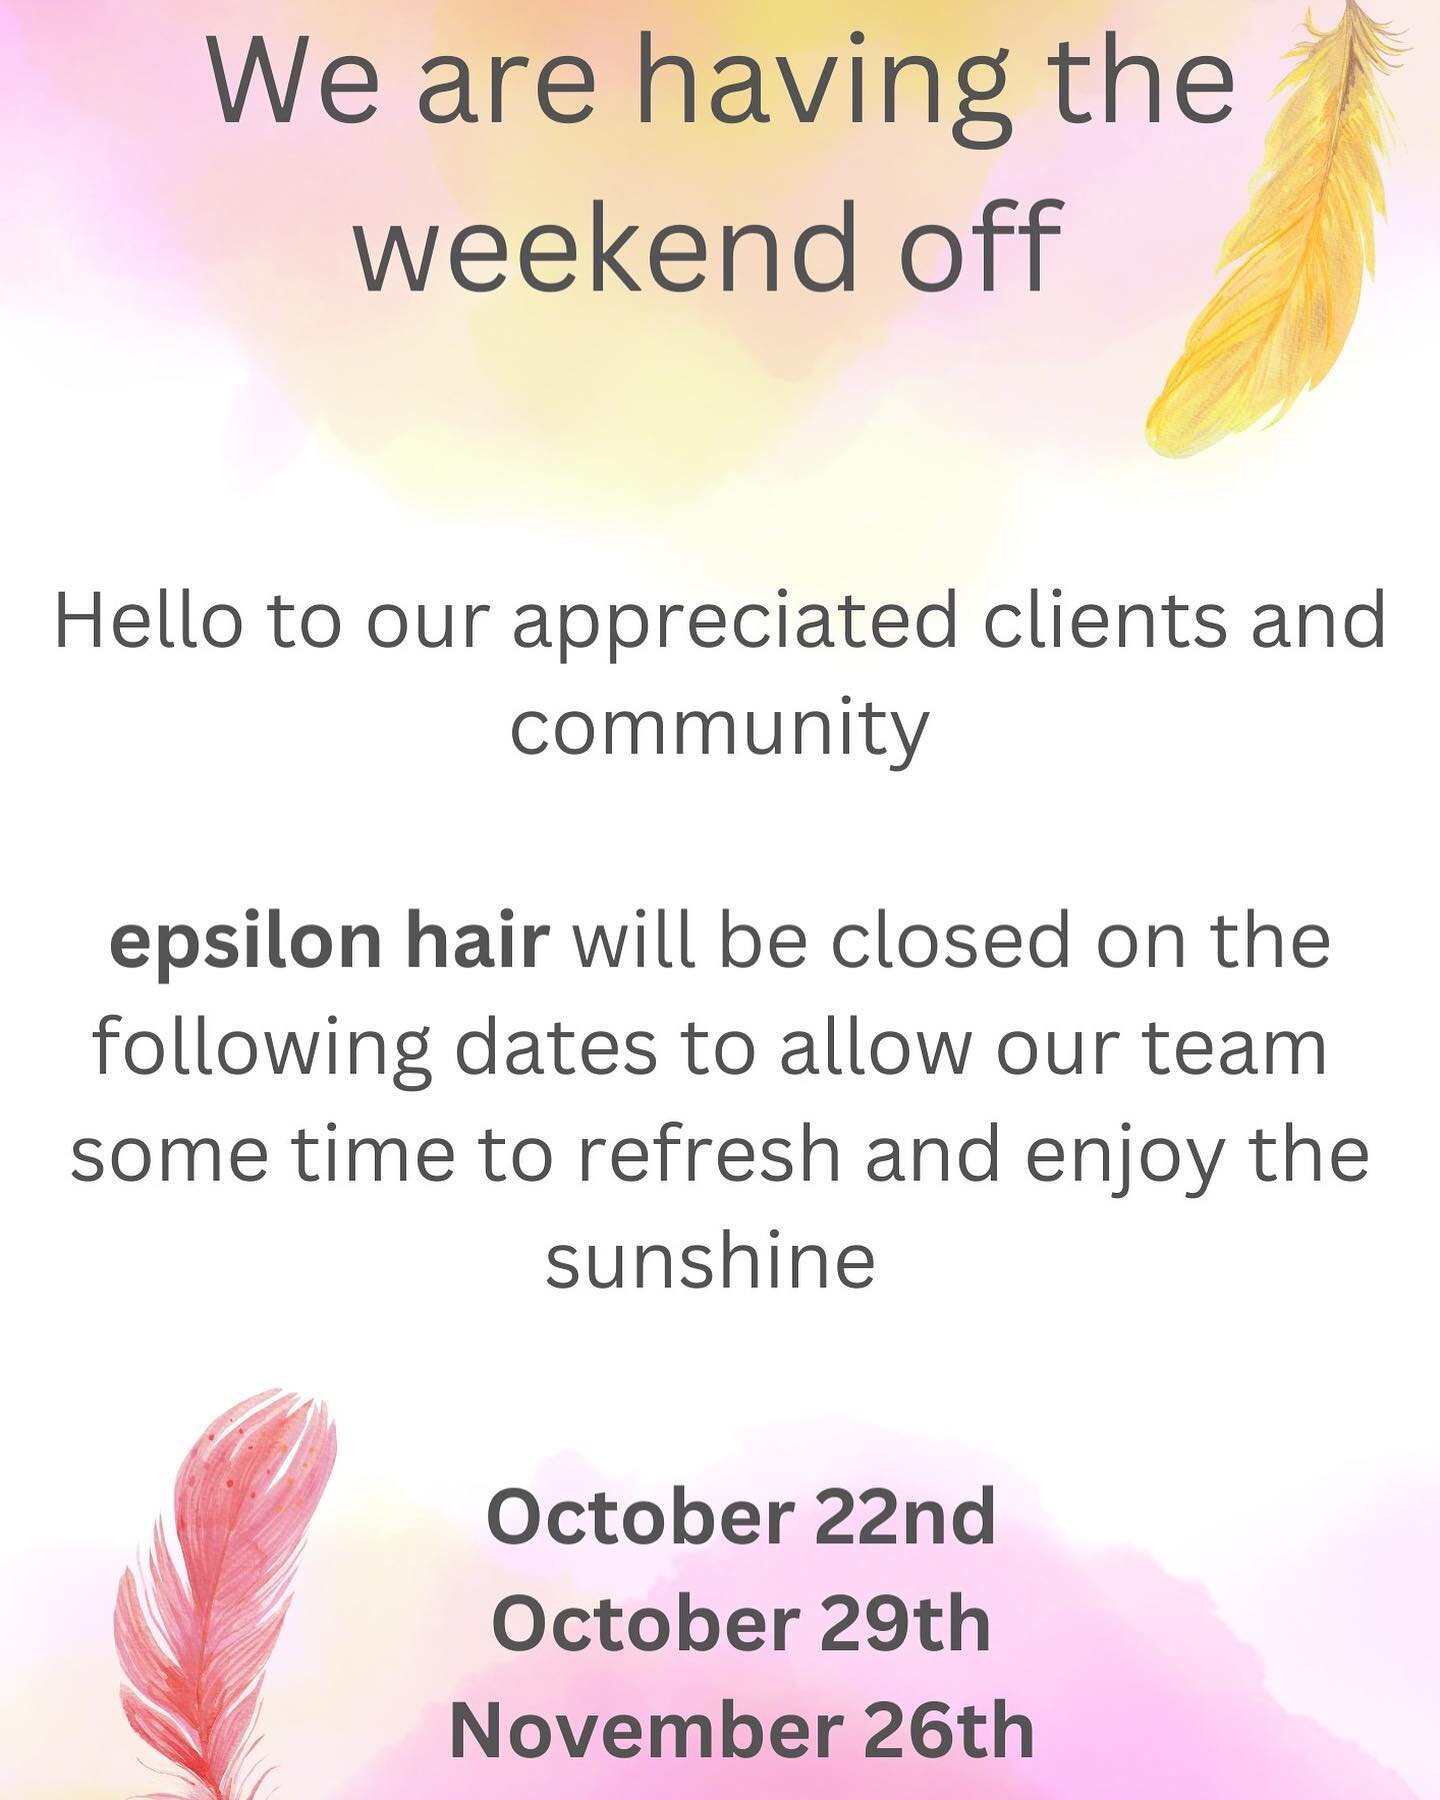 The traditional hairdressing business model includes all staff working every Saturday. Last year we shook it up by giving everyone one rostered Saturday off every month. Our new evolution includes closing 1-2 Saturdays a month so that every team memb